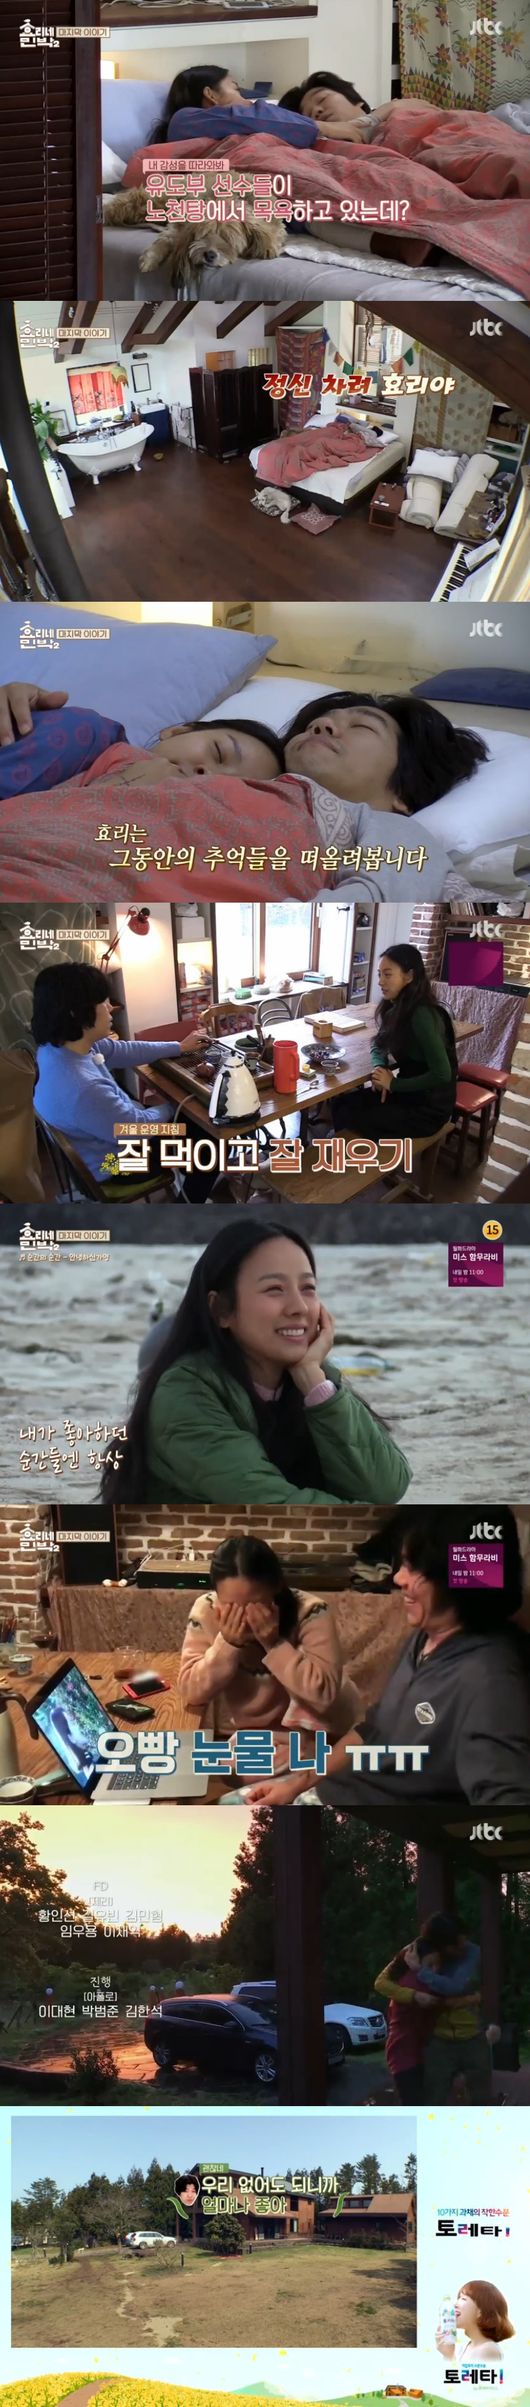 <p>Season 2 ended, but Lee Hyori and Sang Saen came up with expectations with reference to the end season 3 of the broadcast.</p><p>The last story was told at the JTBC entertainment Hyo Ri 4 Guest house Season 2 broadcasted on 20th.</p><p>Hyeori and late this day, after the people left, for the first time they lay down on a couple s bed. Leaning on the earlier product, Hyeori said, Even if people do many, they are not visible, and The overseas oil wells are cosmetically and frankly polished, indicating that the influence of business outage will not go away. It was. Although it says mental chararo in the beginning of the year, she calls treasure swim towards the empty sky, and it seems that laughter seemed to be suffering from aftereffects as well.</p><p>It was supposed to be the last thing that remained but it was a memory of the past. In order to appease such unsatisfactory, we released all unpublished images.</p><p>First, the first encounter of Im Yoon-ah with Hyeori met for the first time in almost 10 years was drawn. Especially the food of Im Yoon-ah breakfast master who got up to your table every morning got a lot of looks. Wrapping in Jatukuke, the menu of sugito and signature never failed. Im Yoon-ah, who had bought a waffle machine directly in Seoul before coming Mimbapjip, such Im Yoon-ah table waffle was born.</p><p>In fact, it was Im Yoon-ah who did not have Motohanunge from the beginning. It was Im Yoon-ah who did crispy with folk remedies until clogged toilet, as well as washing the food roasted carefully after changing the vacuum from the vacuum cleaner head. It was Im Yoon-ah with the best condition of part-time job. Im Yoon-ah hurts Lee Hyori, but satisfied the vacant seat to say, I will be done with Im Yoon-ah.</p><p>The first appearance of Park Bo-gum which was full of wondrous things was drawn. Reminiscent of the straight sword from the first encounter, the customer was impressed that it was like a fairy, looking at another race, a man god. It was a sword that was well integrated with guest house visitors while enjoying the outdoor bath together with customers as well as getting up early in the morning from the early morning of course. Guests did not forget that sword, I gave you a lot about jokes without hesitation, I was thankful for that. Guests also said that Park Bo-gum is a national treasure, praying for your Taisei as his heart icon.</p><p>The treasure sword was never unbearable man. In addition to not only finding a guest house to let you do but also a melody of a piano on a winter night, a moment when everyone was fascinated by the appearance of a treasure sword to a peaceful melody and a song was drawn. Hyeori admired the two deer Kemi, Im Yoon-ah is a good treasure without a motohanounge.</p><p>As described above, the operation of Winter - Spring that was the season 2 after the 3-month long-term conquest was ended. Among all the unsatisfactory, the beginning of the broadcast and Hyo Ri ended the expectation of opening season 3, suggesting the opinion of to change to a Guest house without a hotel or to make it non-Intel.</p><p>Broadcast screen capture of Hyo Ri 4 Guest house Season 2</p>